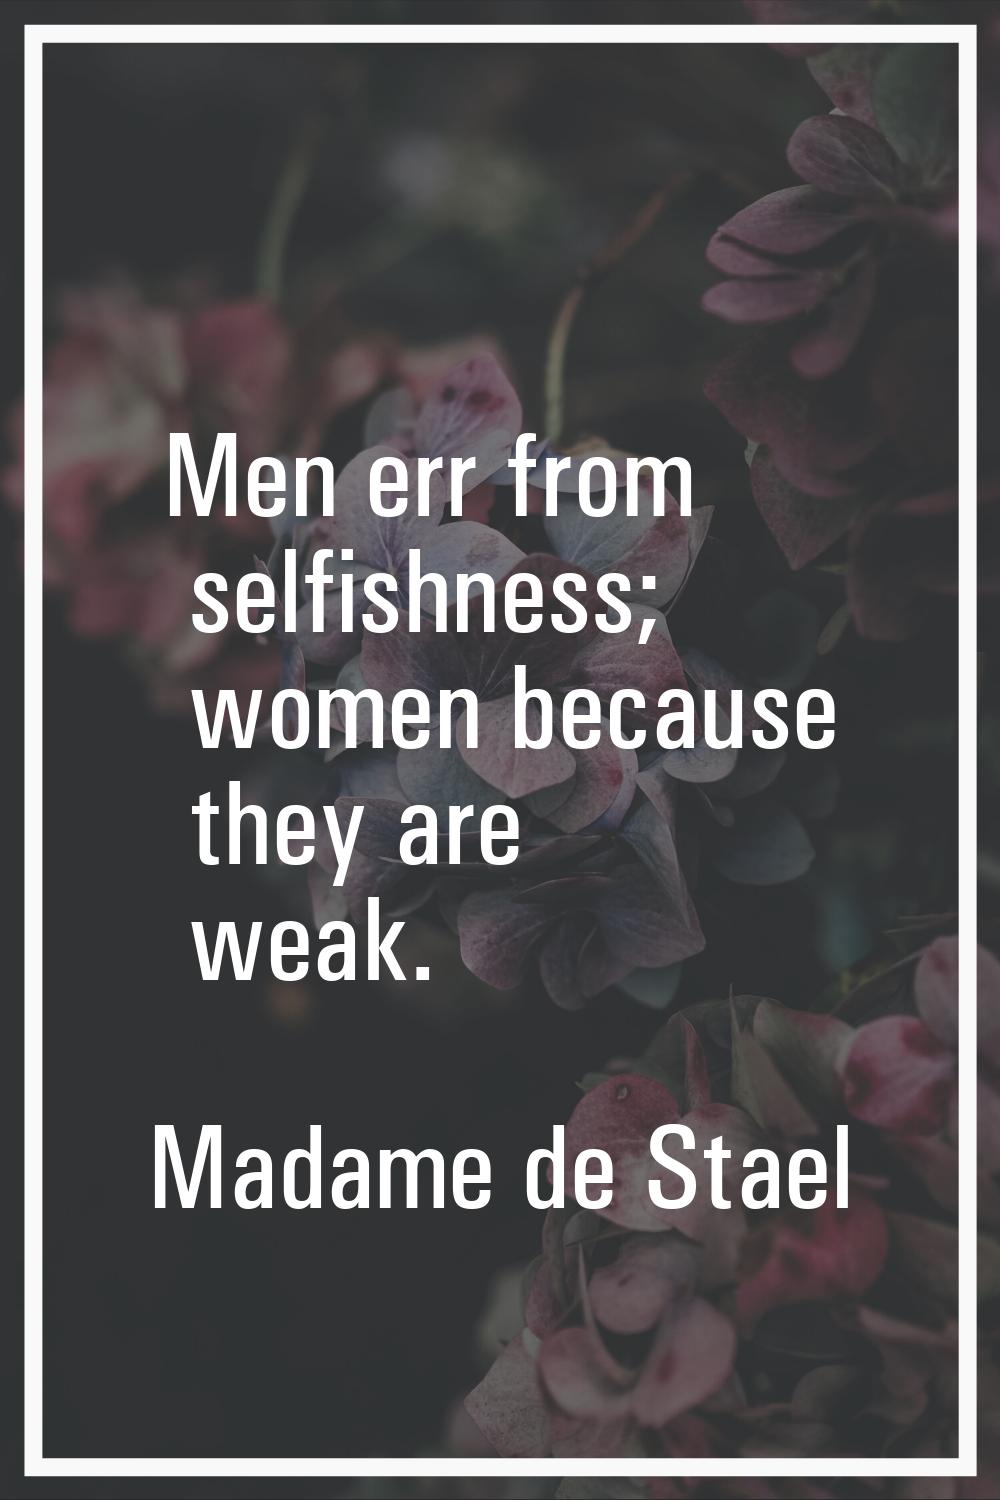 Men err from selfishness; women because they are weak.